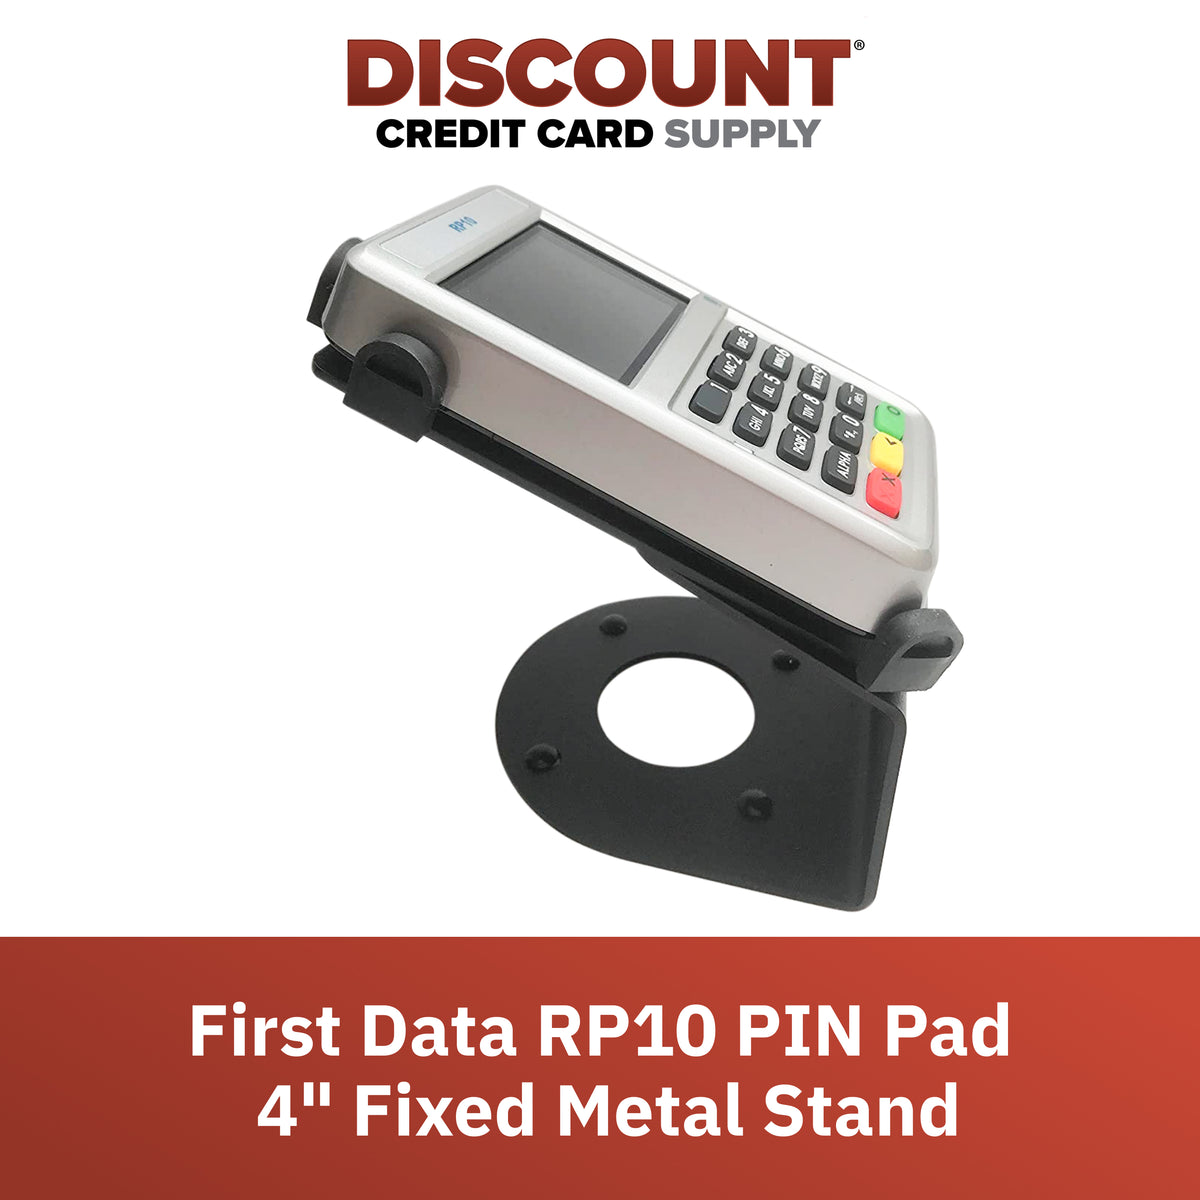 Pin on discount display